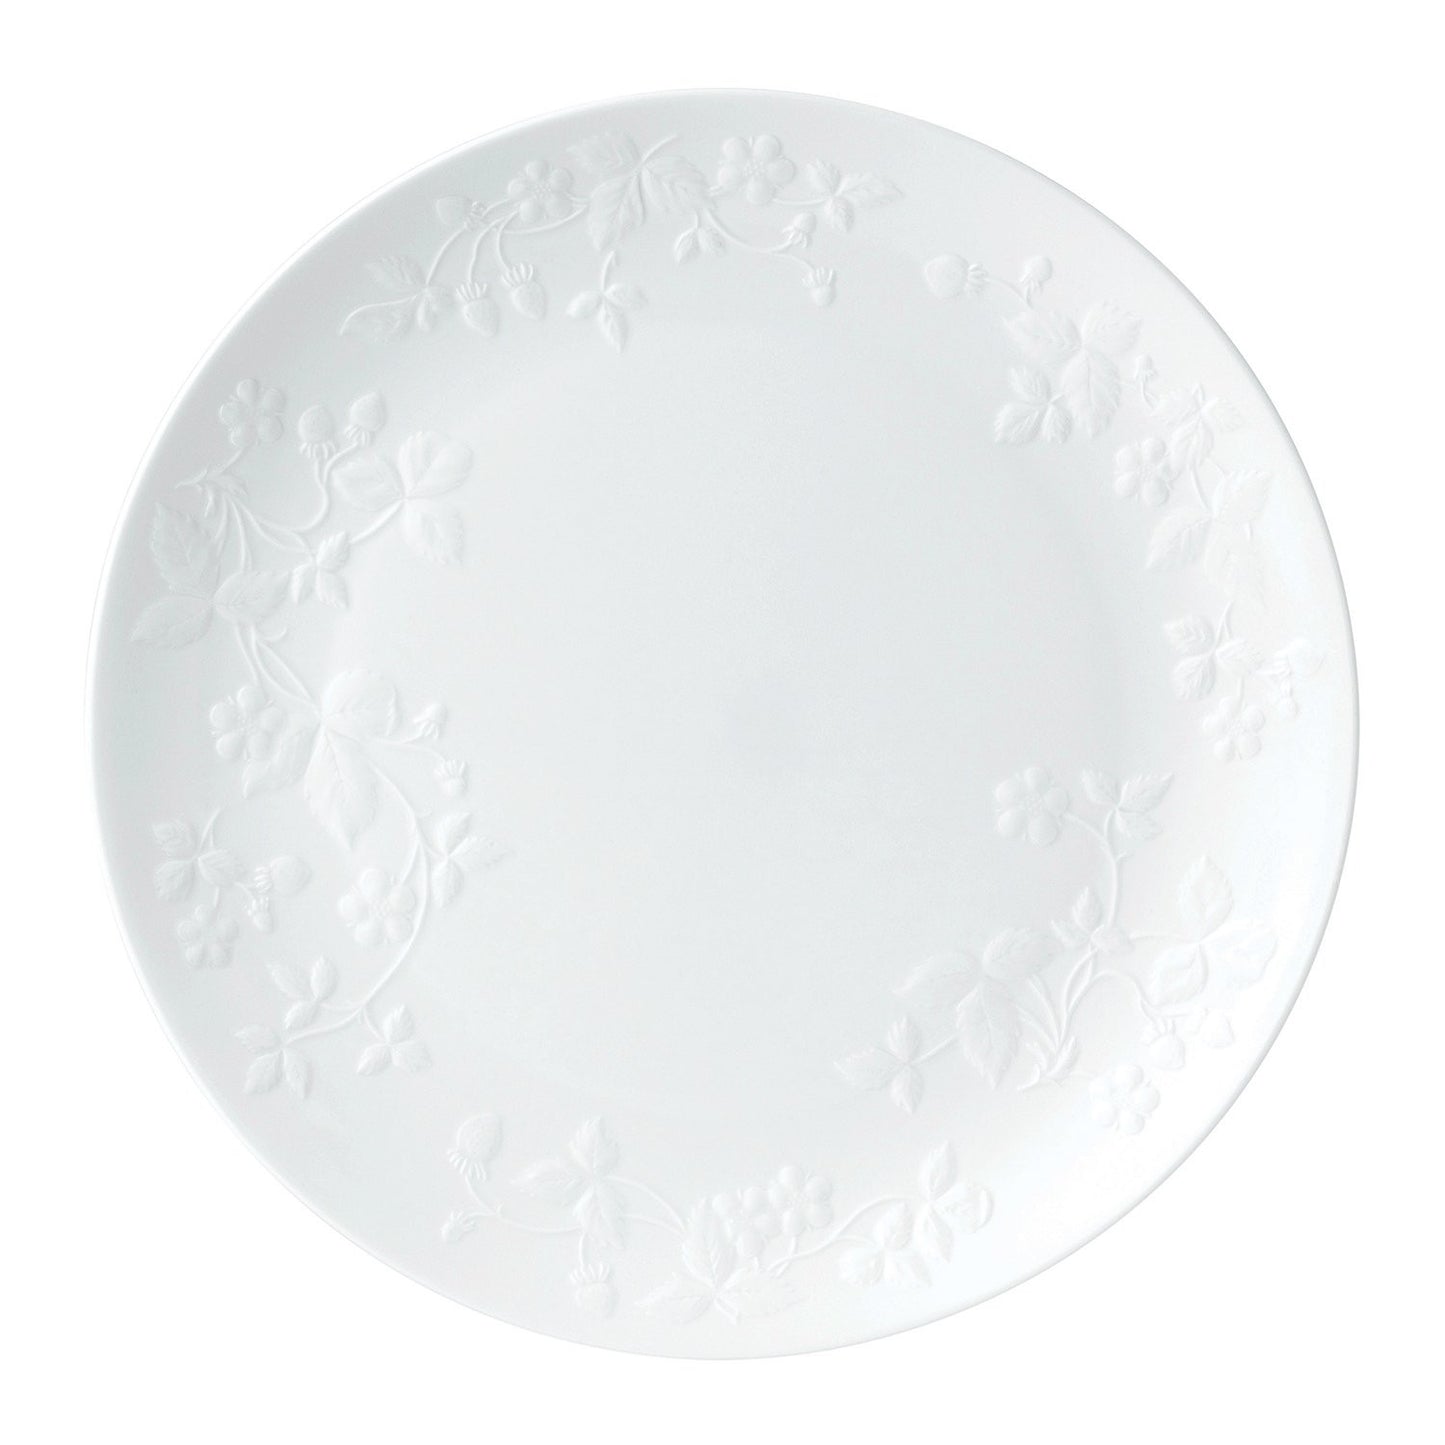 Wedgwood Wild Strawberry White Couped Plate 10.6 Inch